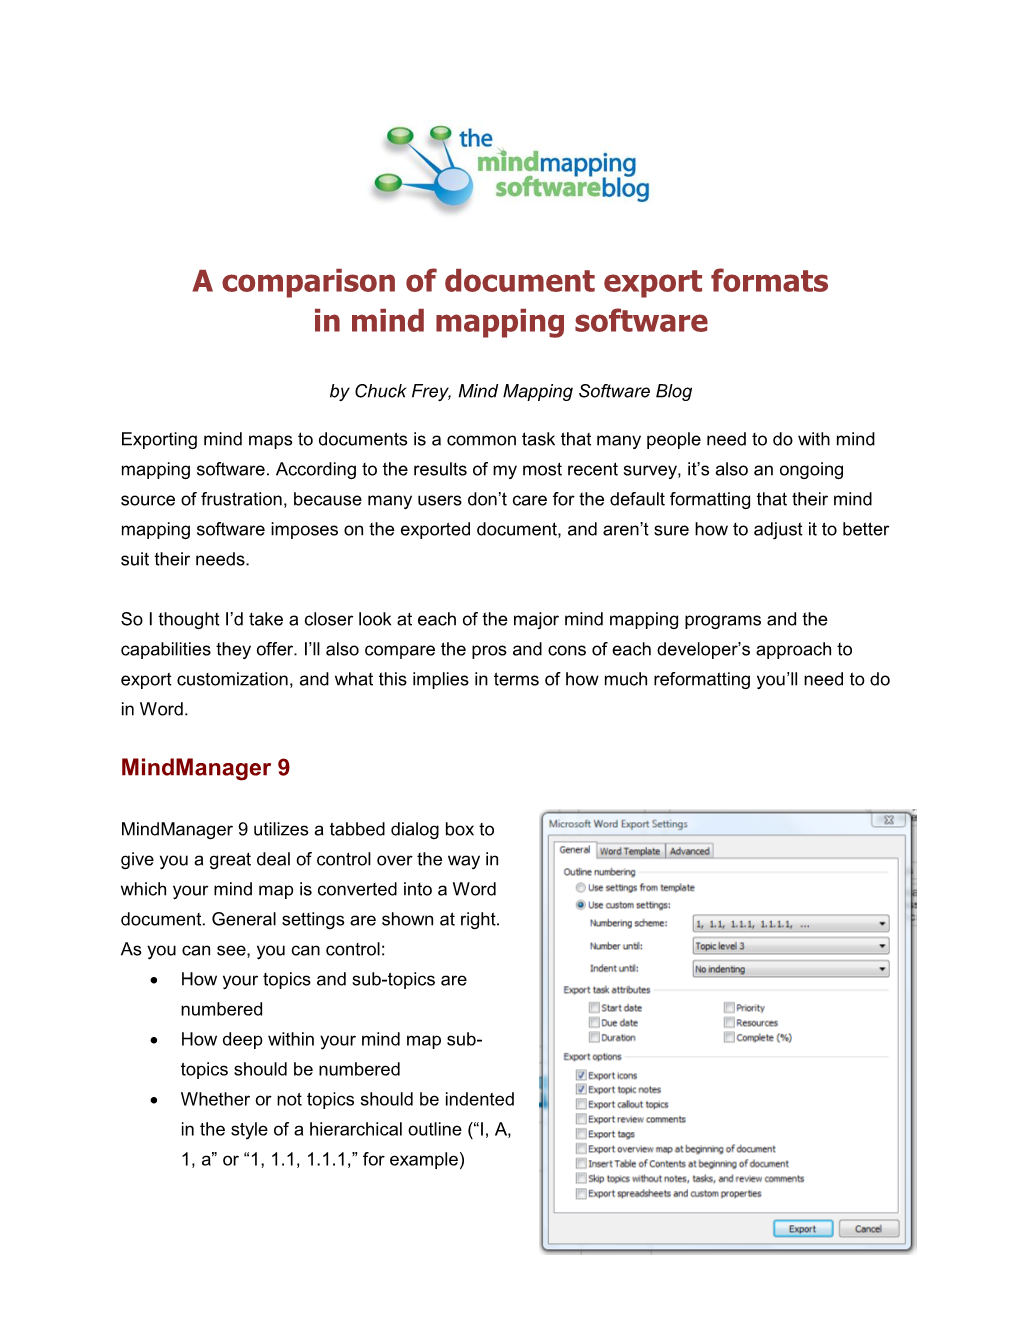 A Comparison of Document Export Formats in Mind Mapping Software